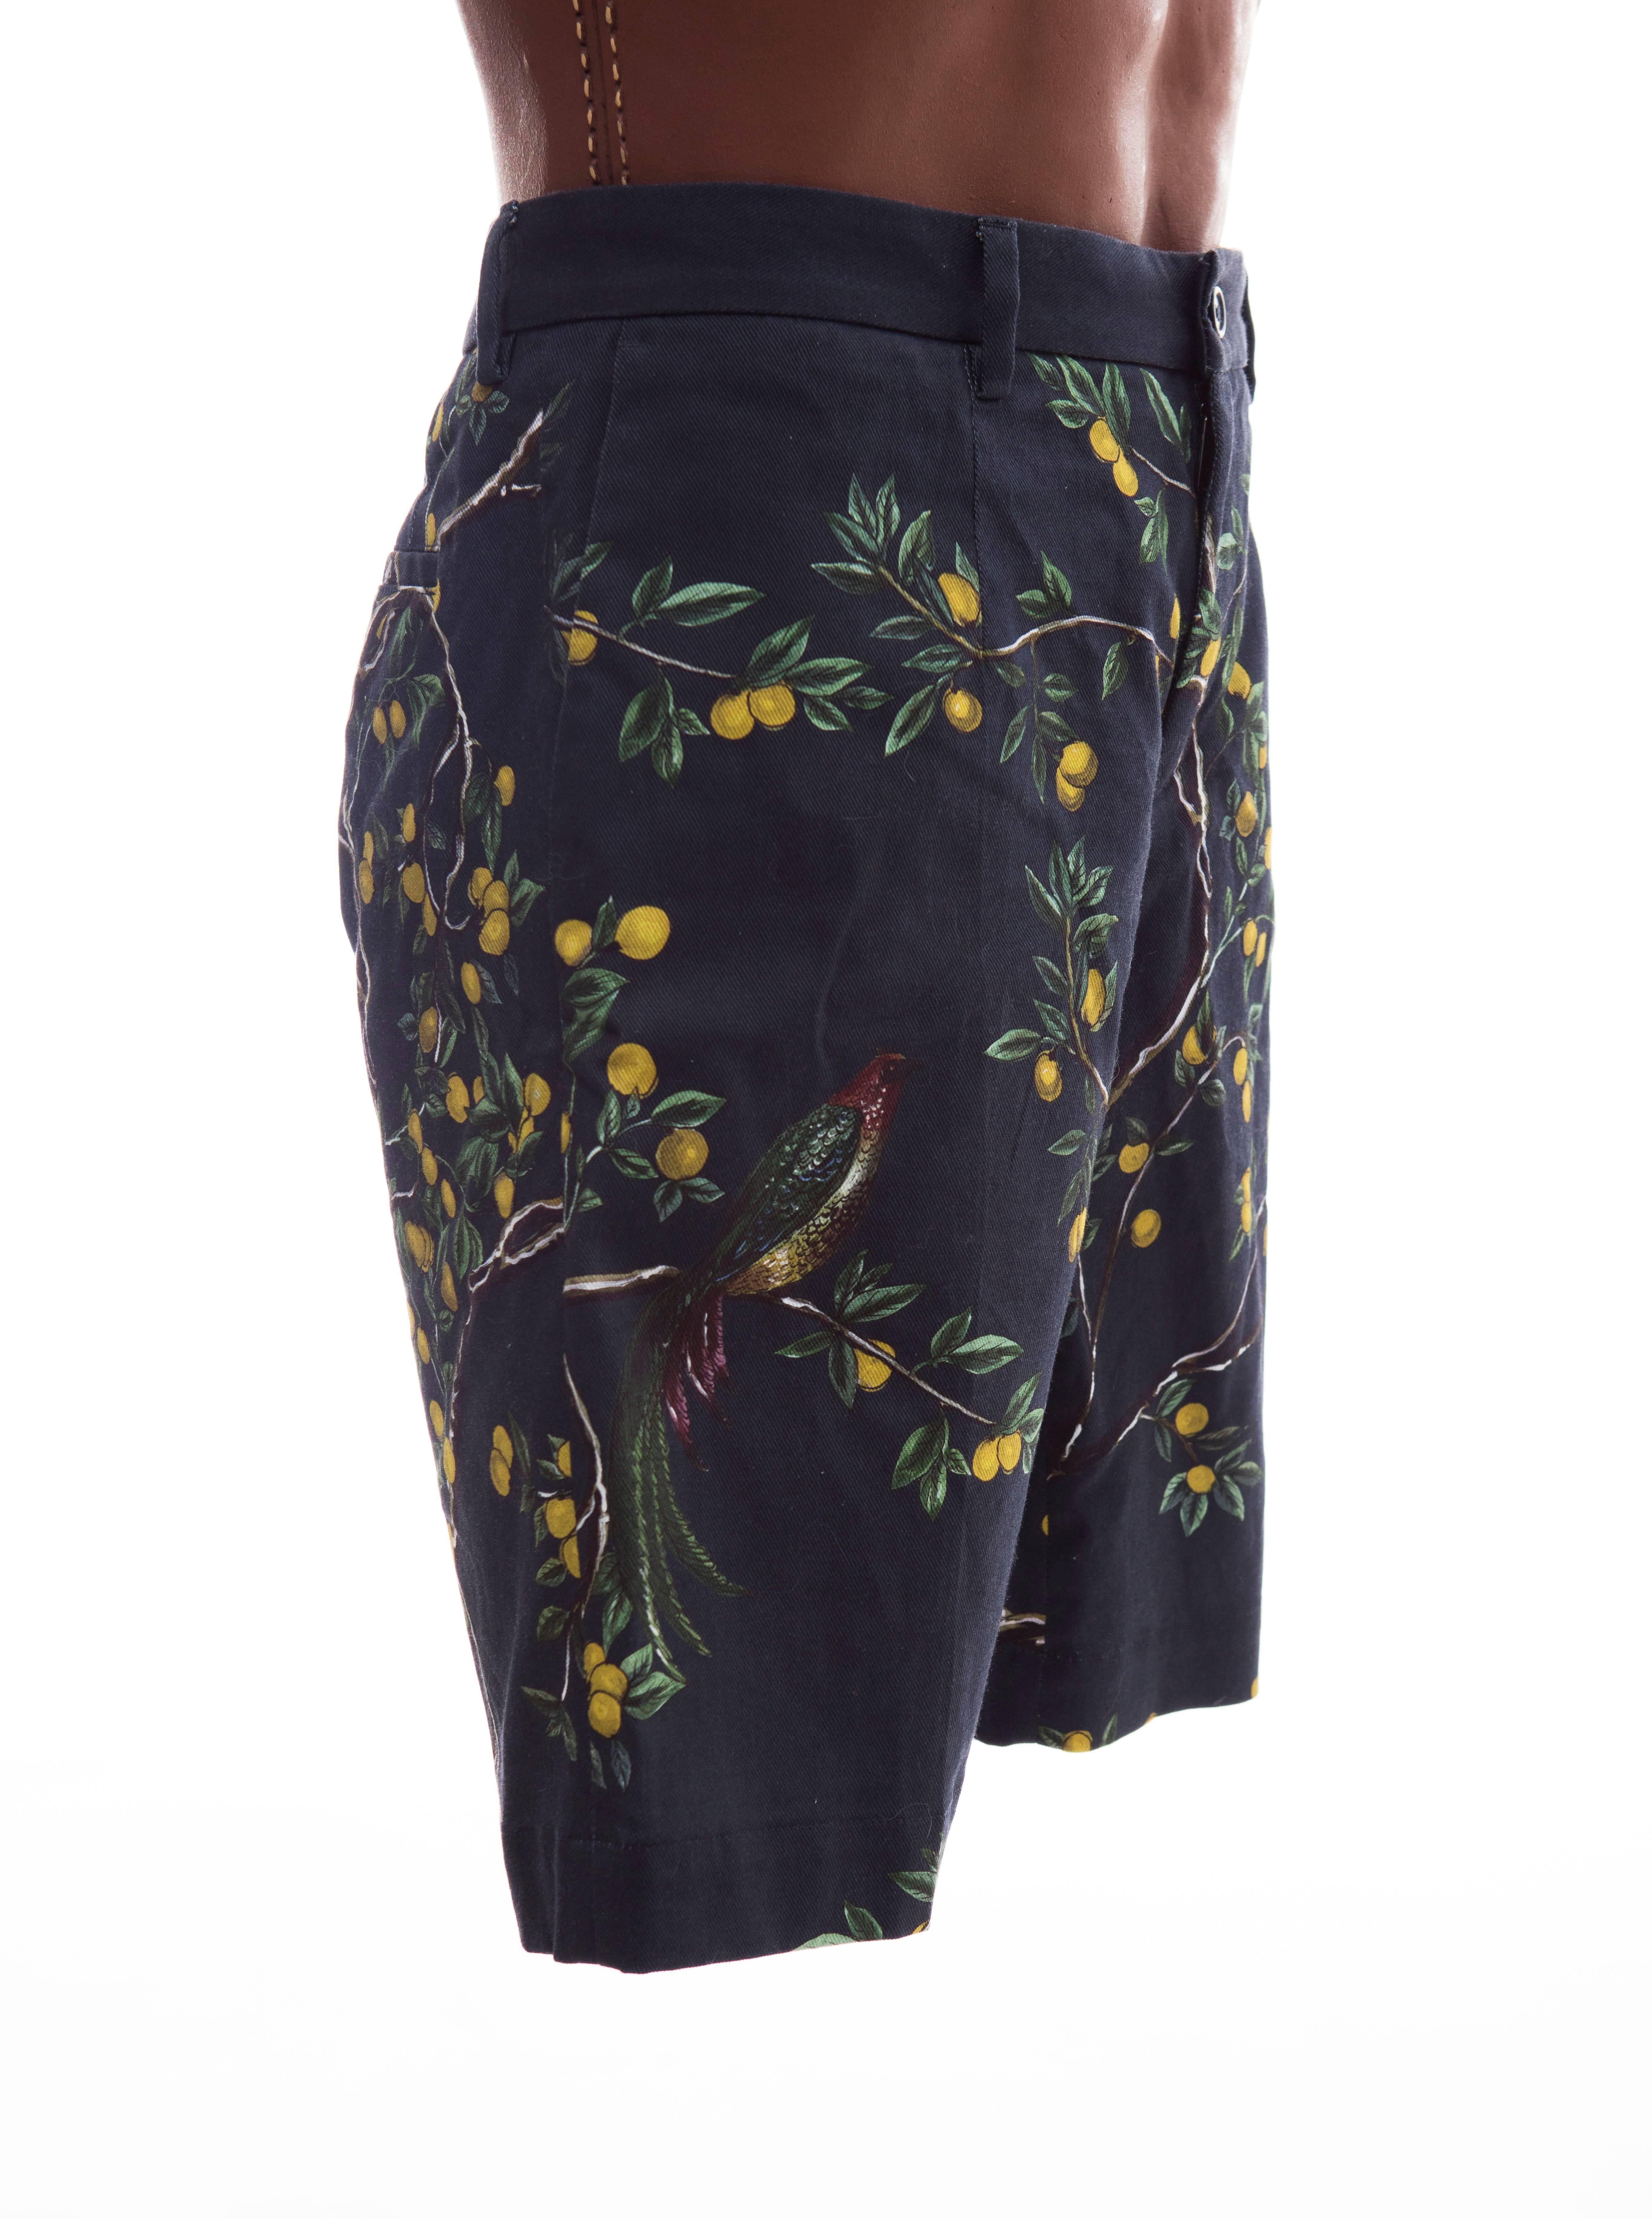 Dolce & Gabbana, Spring-Summer 2016 men's black printed birds lemons cotton button and zip front shorts with two front and back pockets.

IT. 48

Waist 34, Length 19